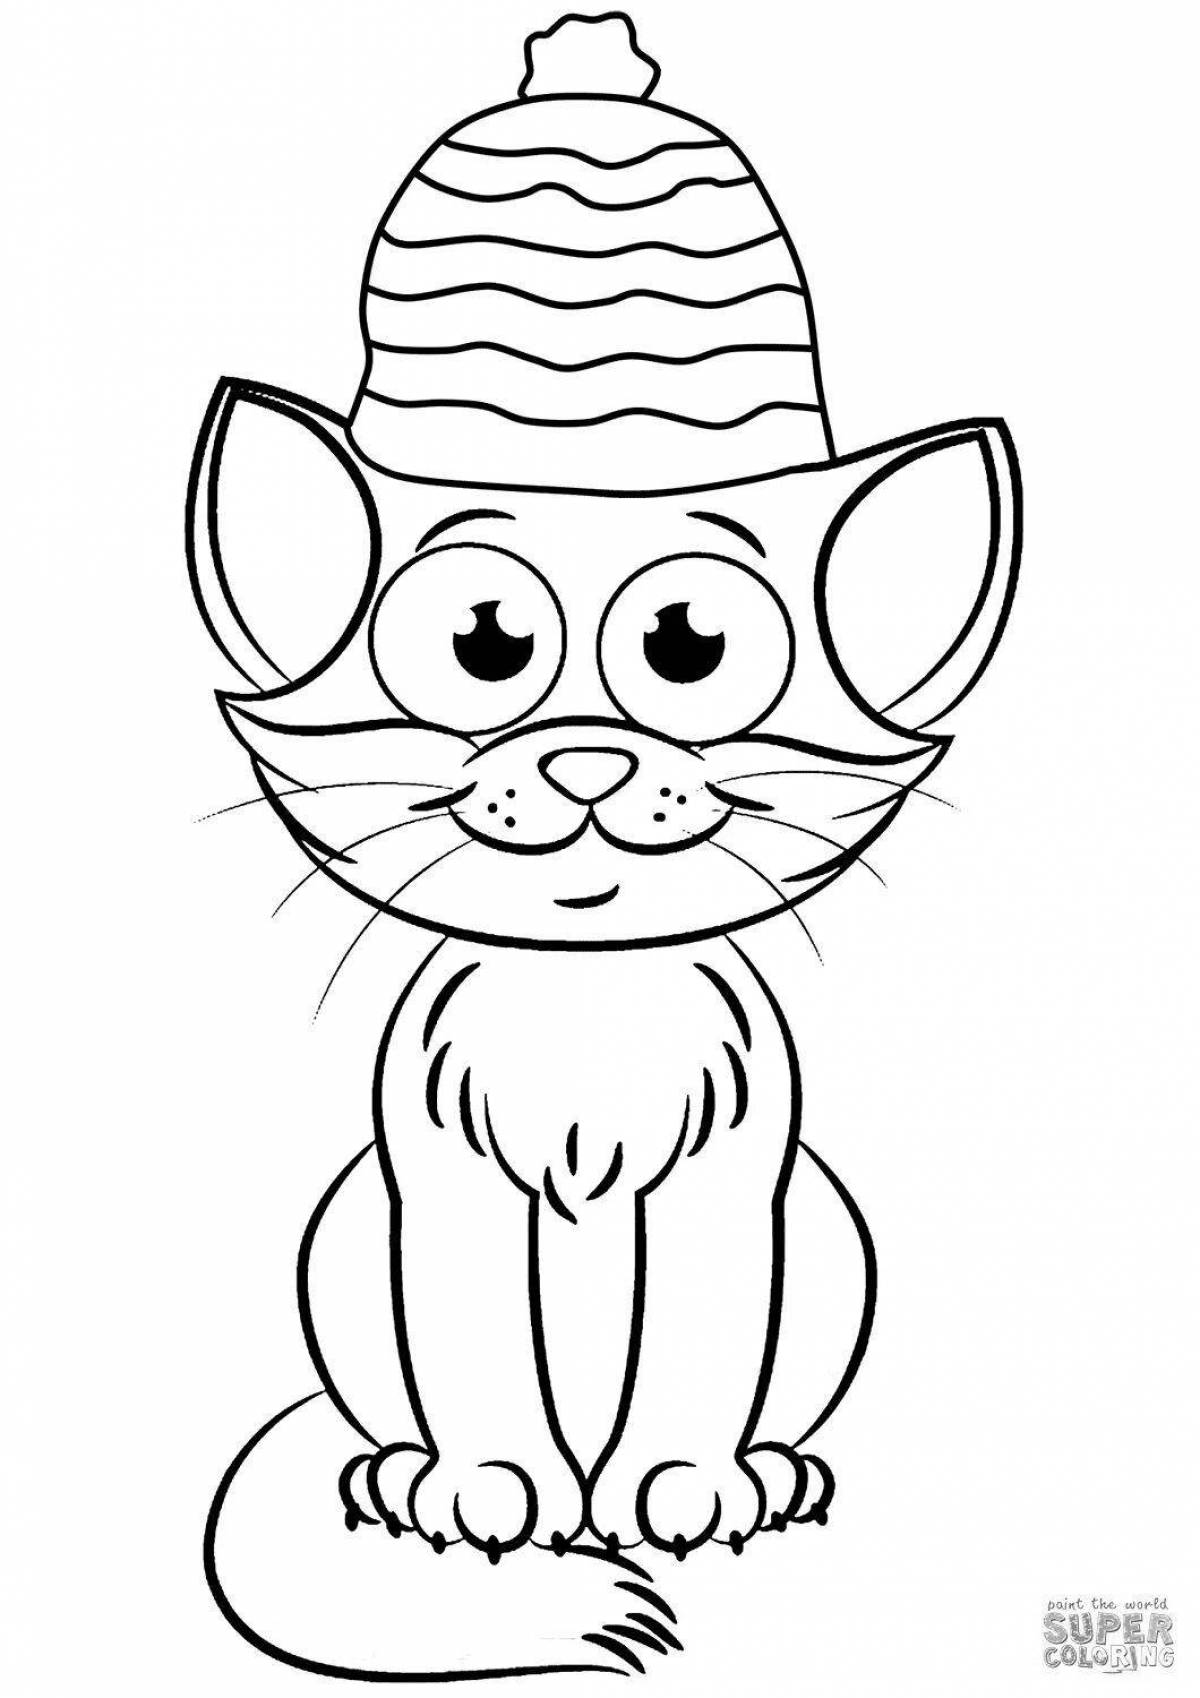 Snuggly coloring page cat baby от ануки